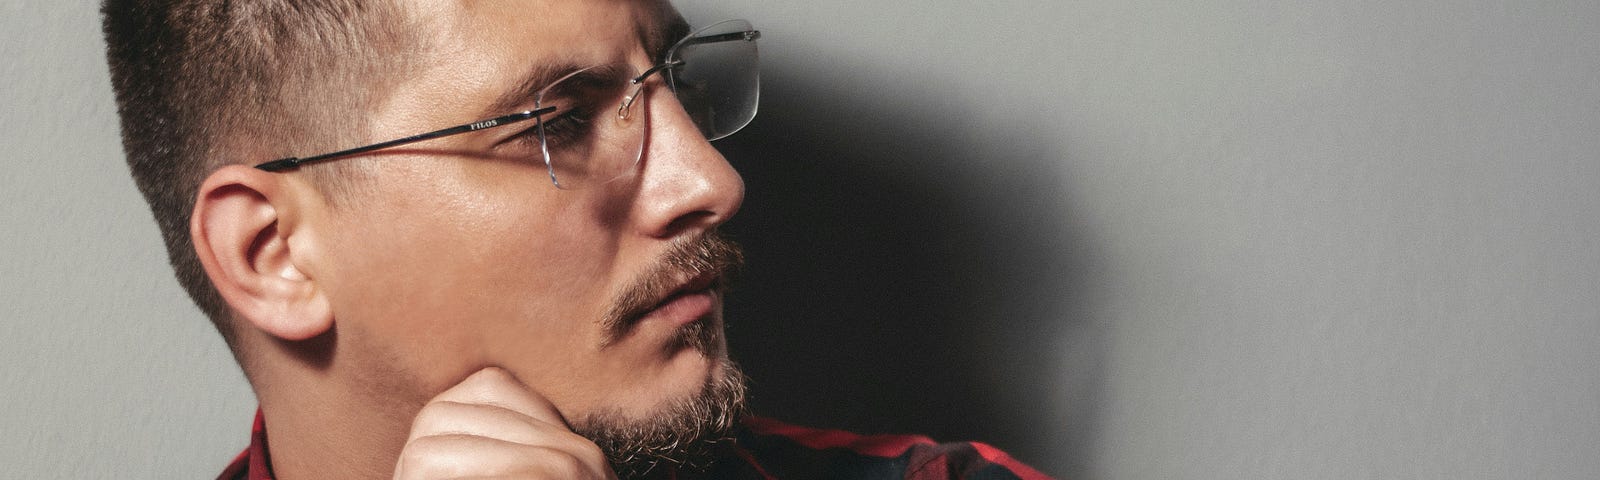 A young man with a mustache and goatee, a red plaid shirt and wearing glasses, looks left at something out of frame, in a “What the…” gaze.